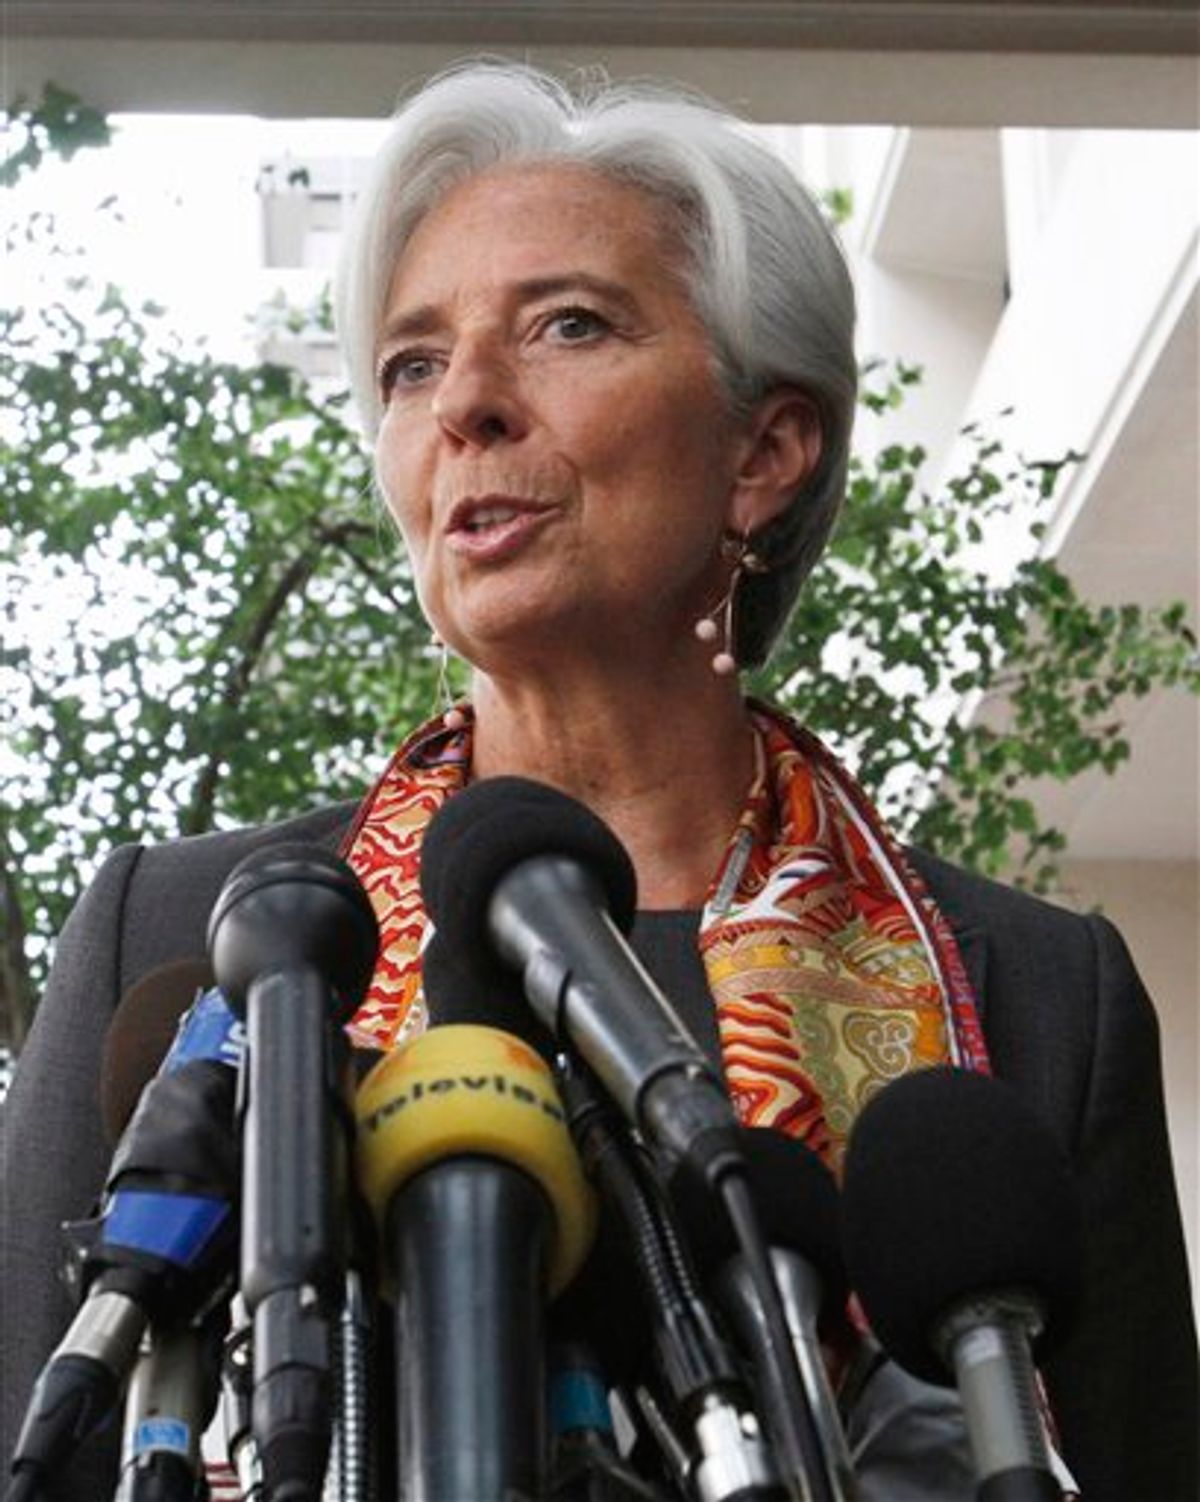 French Finance Minister Christine Lagarde speaks to the media outside the International Monetary Fund in Washington, Thursday, June 23, 2011, where she was interviewing to succeed former IMF Managing Director Dominique Strauss-Kahn. (AP Photo/Jacquelyn Martin) (AP)